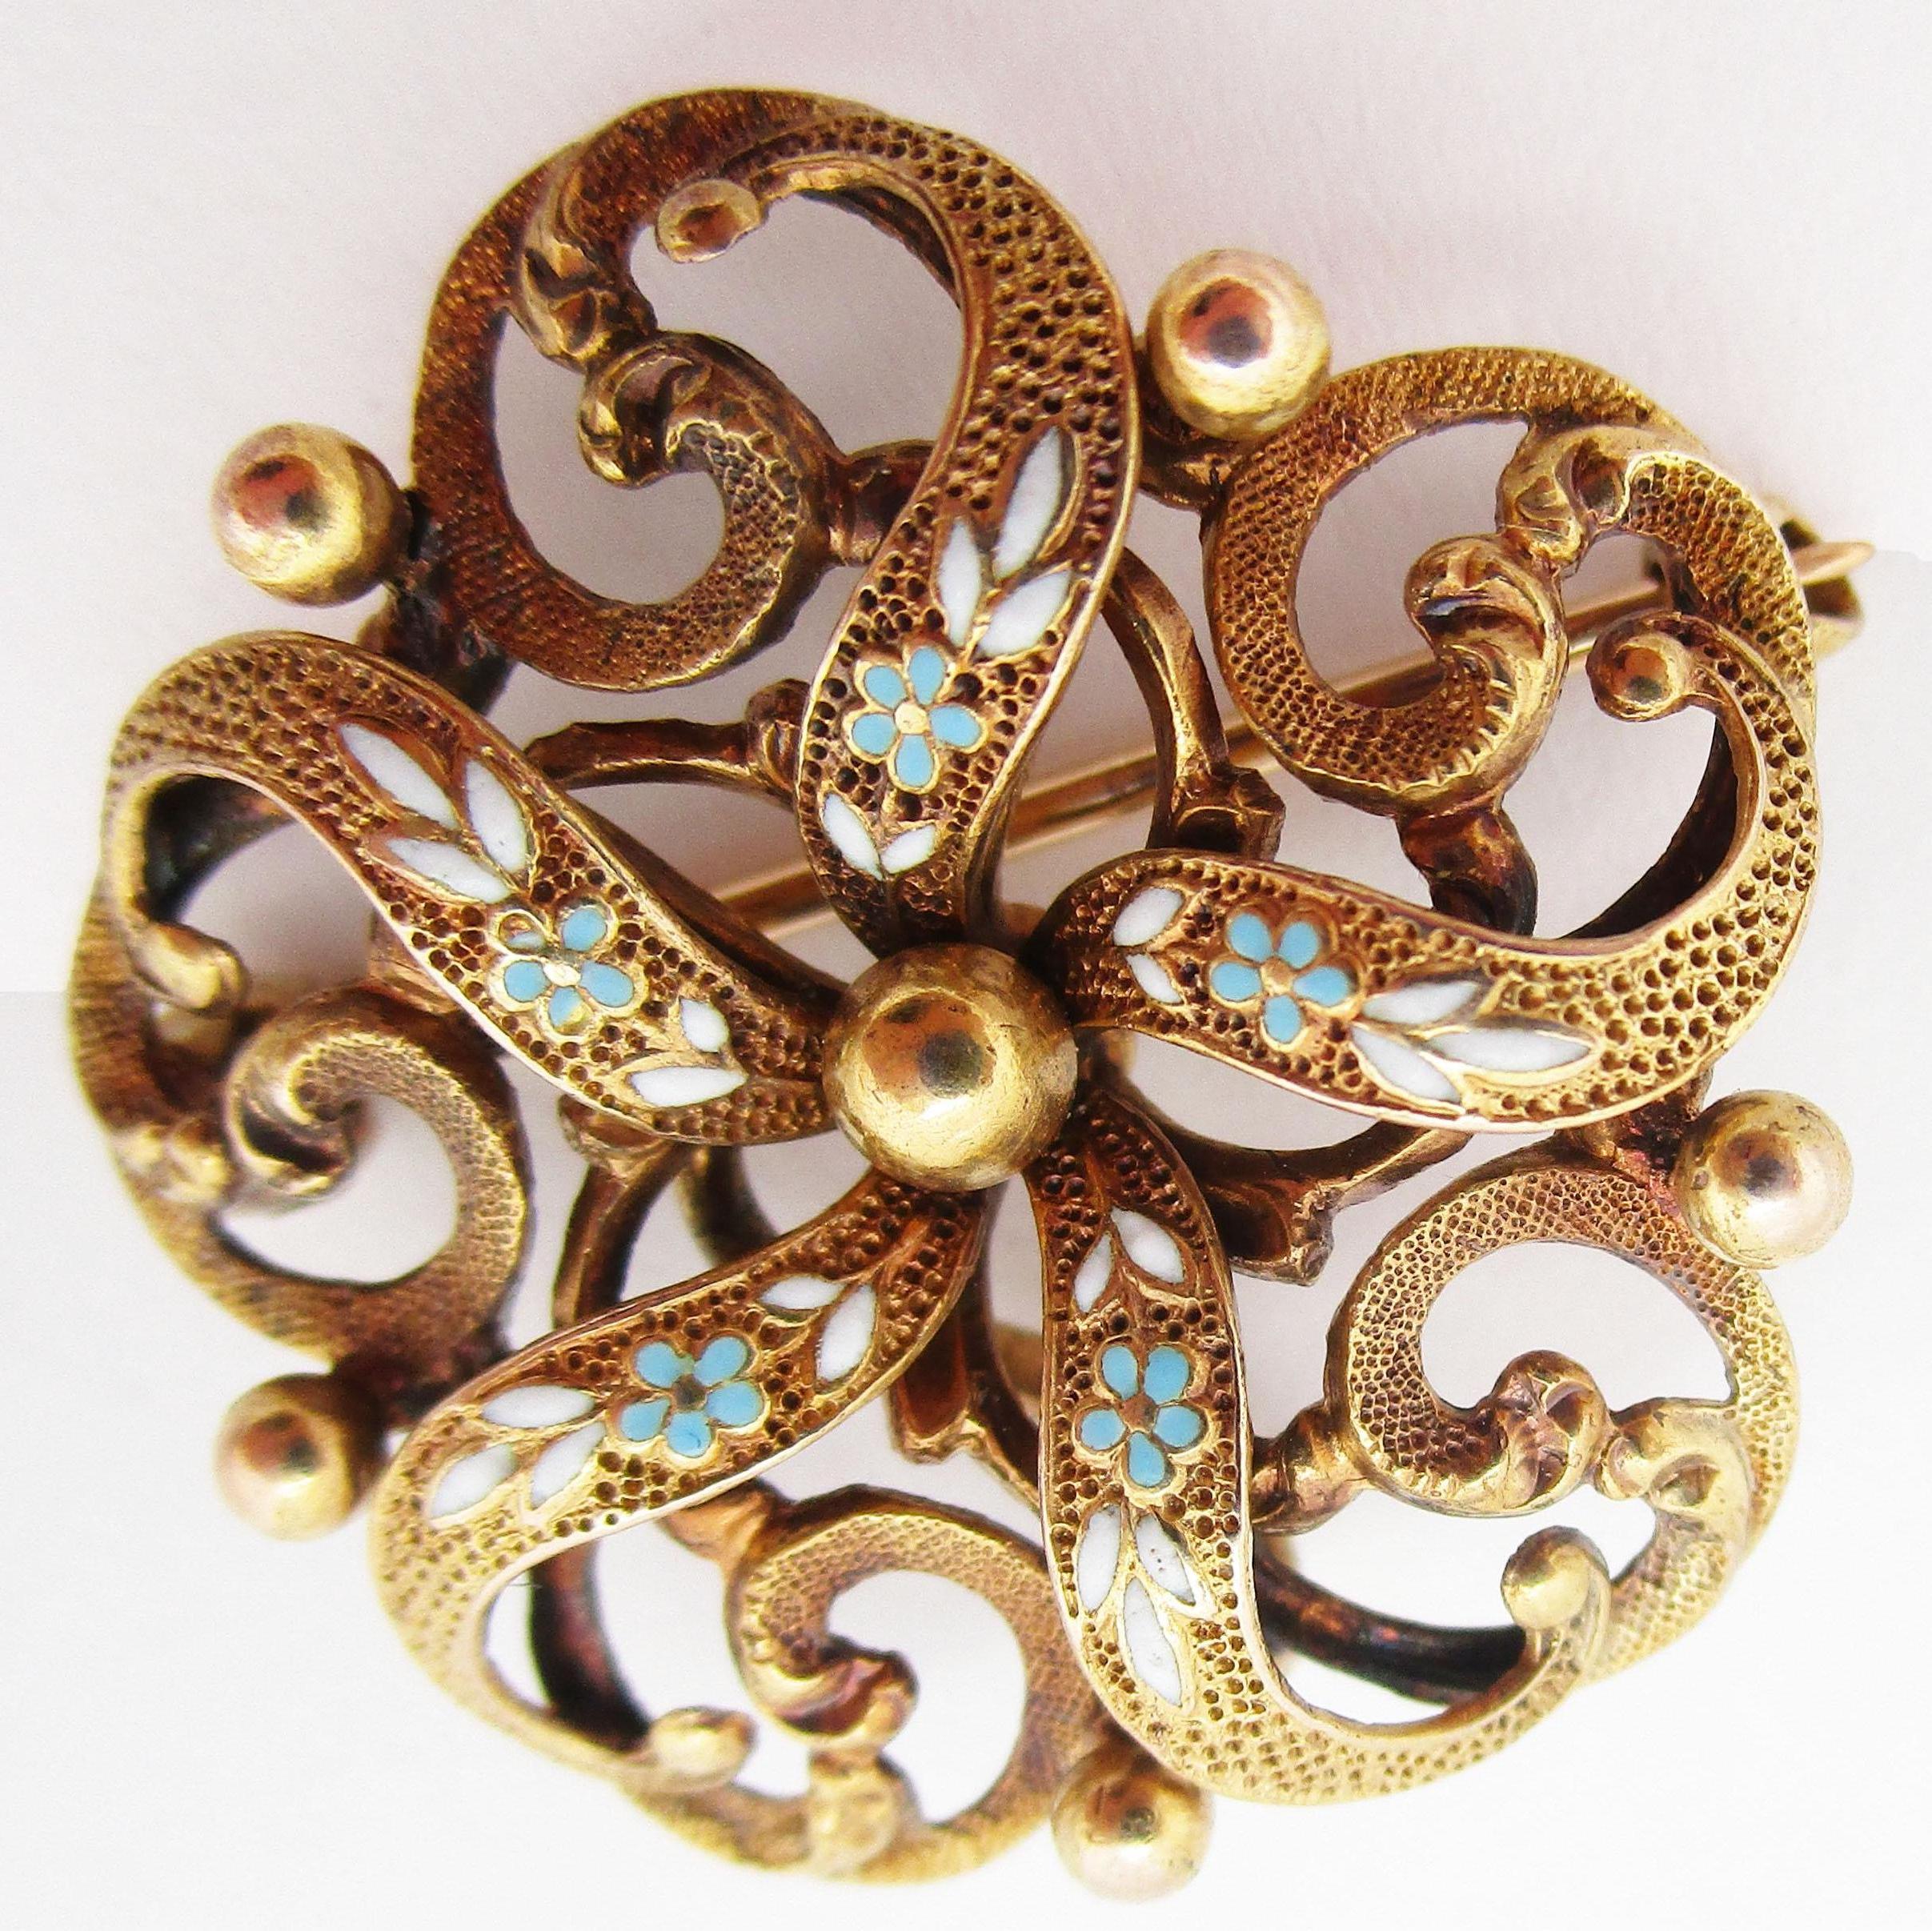 This is a beautiful Victorian pin by Krementz in 14k yellow gold with stunning enamel detailing from 1890. The enamel is in fantastic shape! The 14k gold has a textured appearance that gives this pin an incredible dimensional feel. The enamel